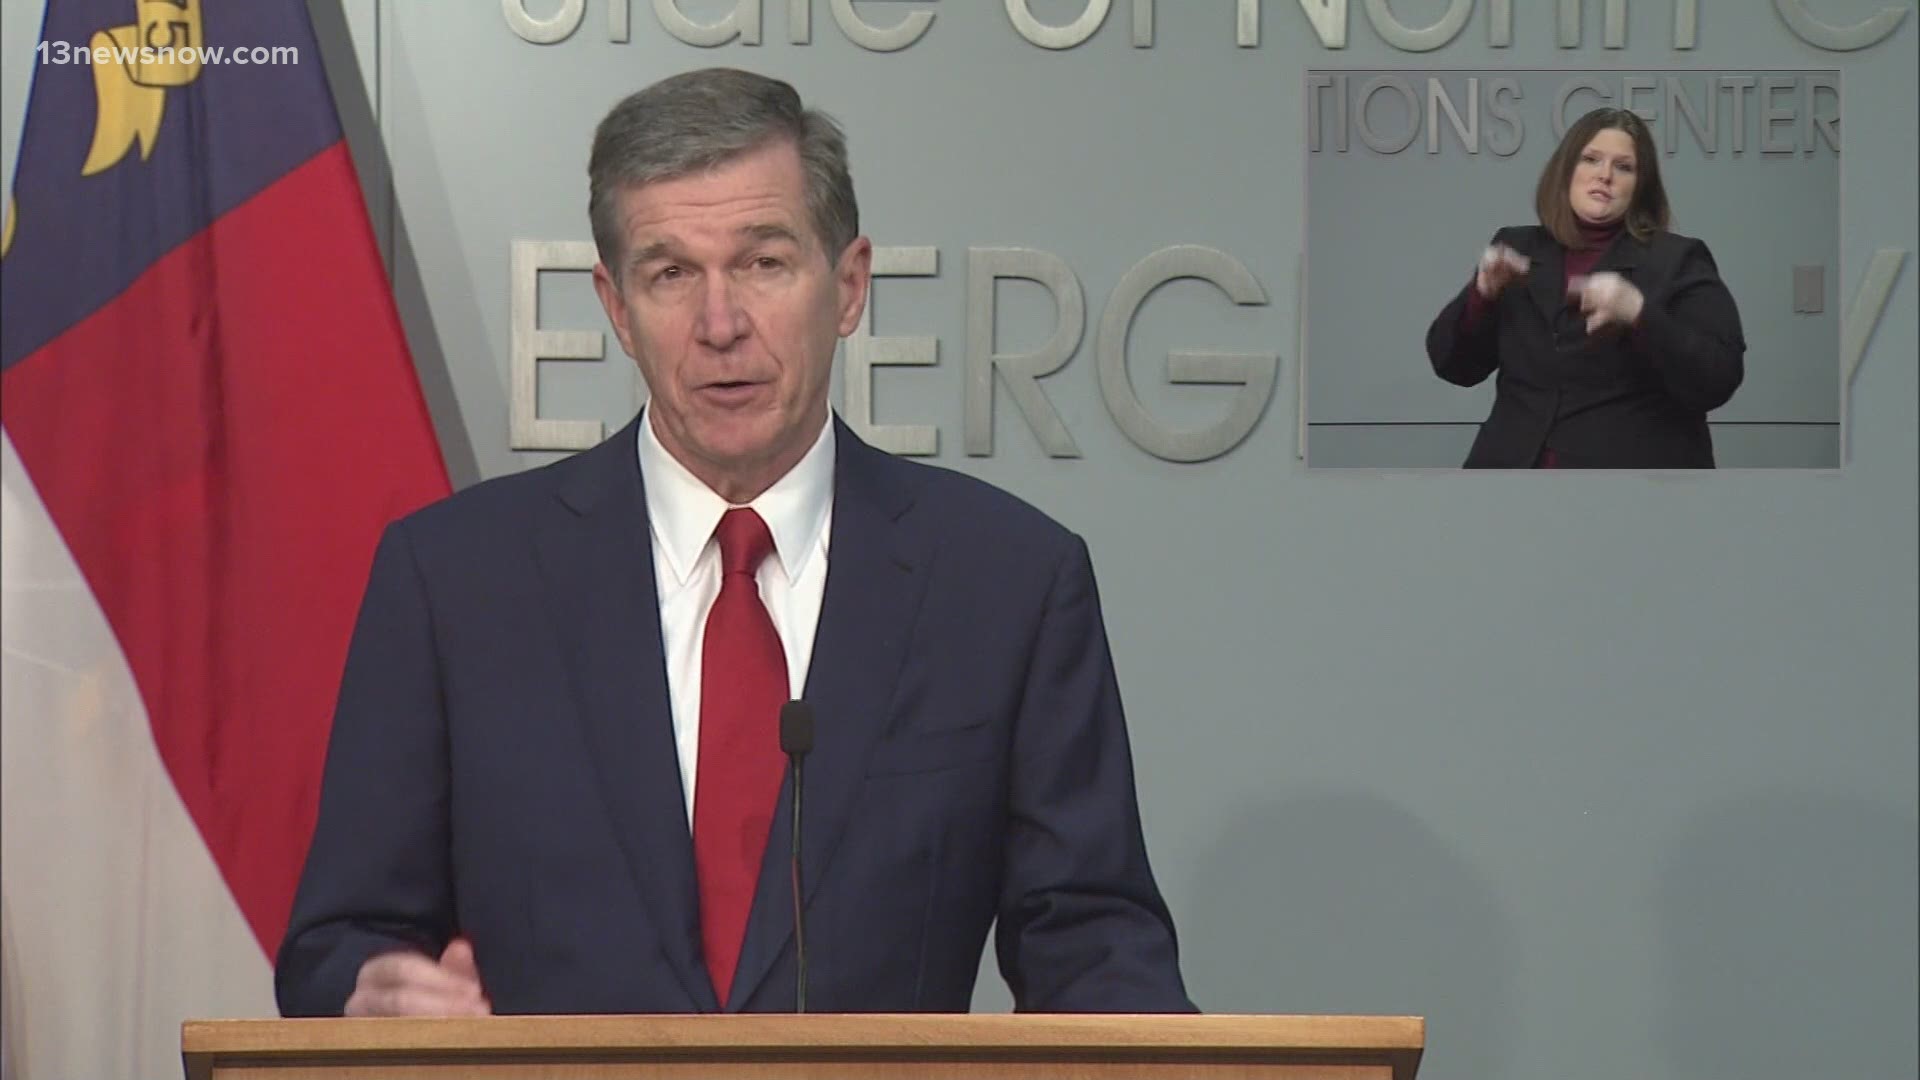 NC Gov. Roy Cooper says health care workers will get the vaccine first.